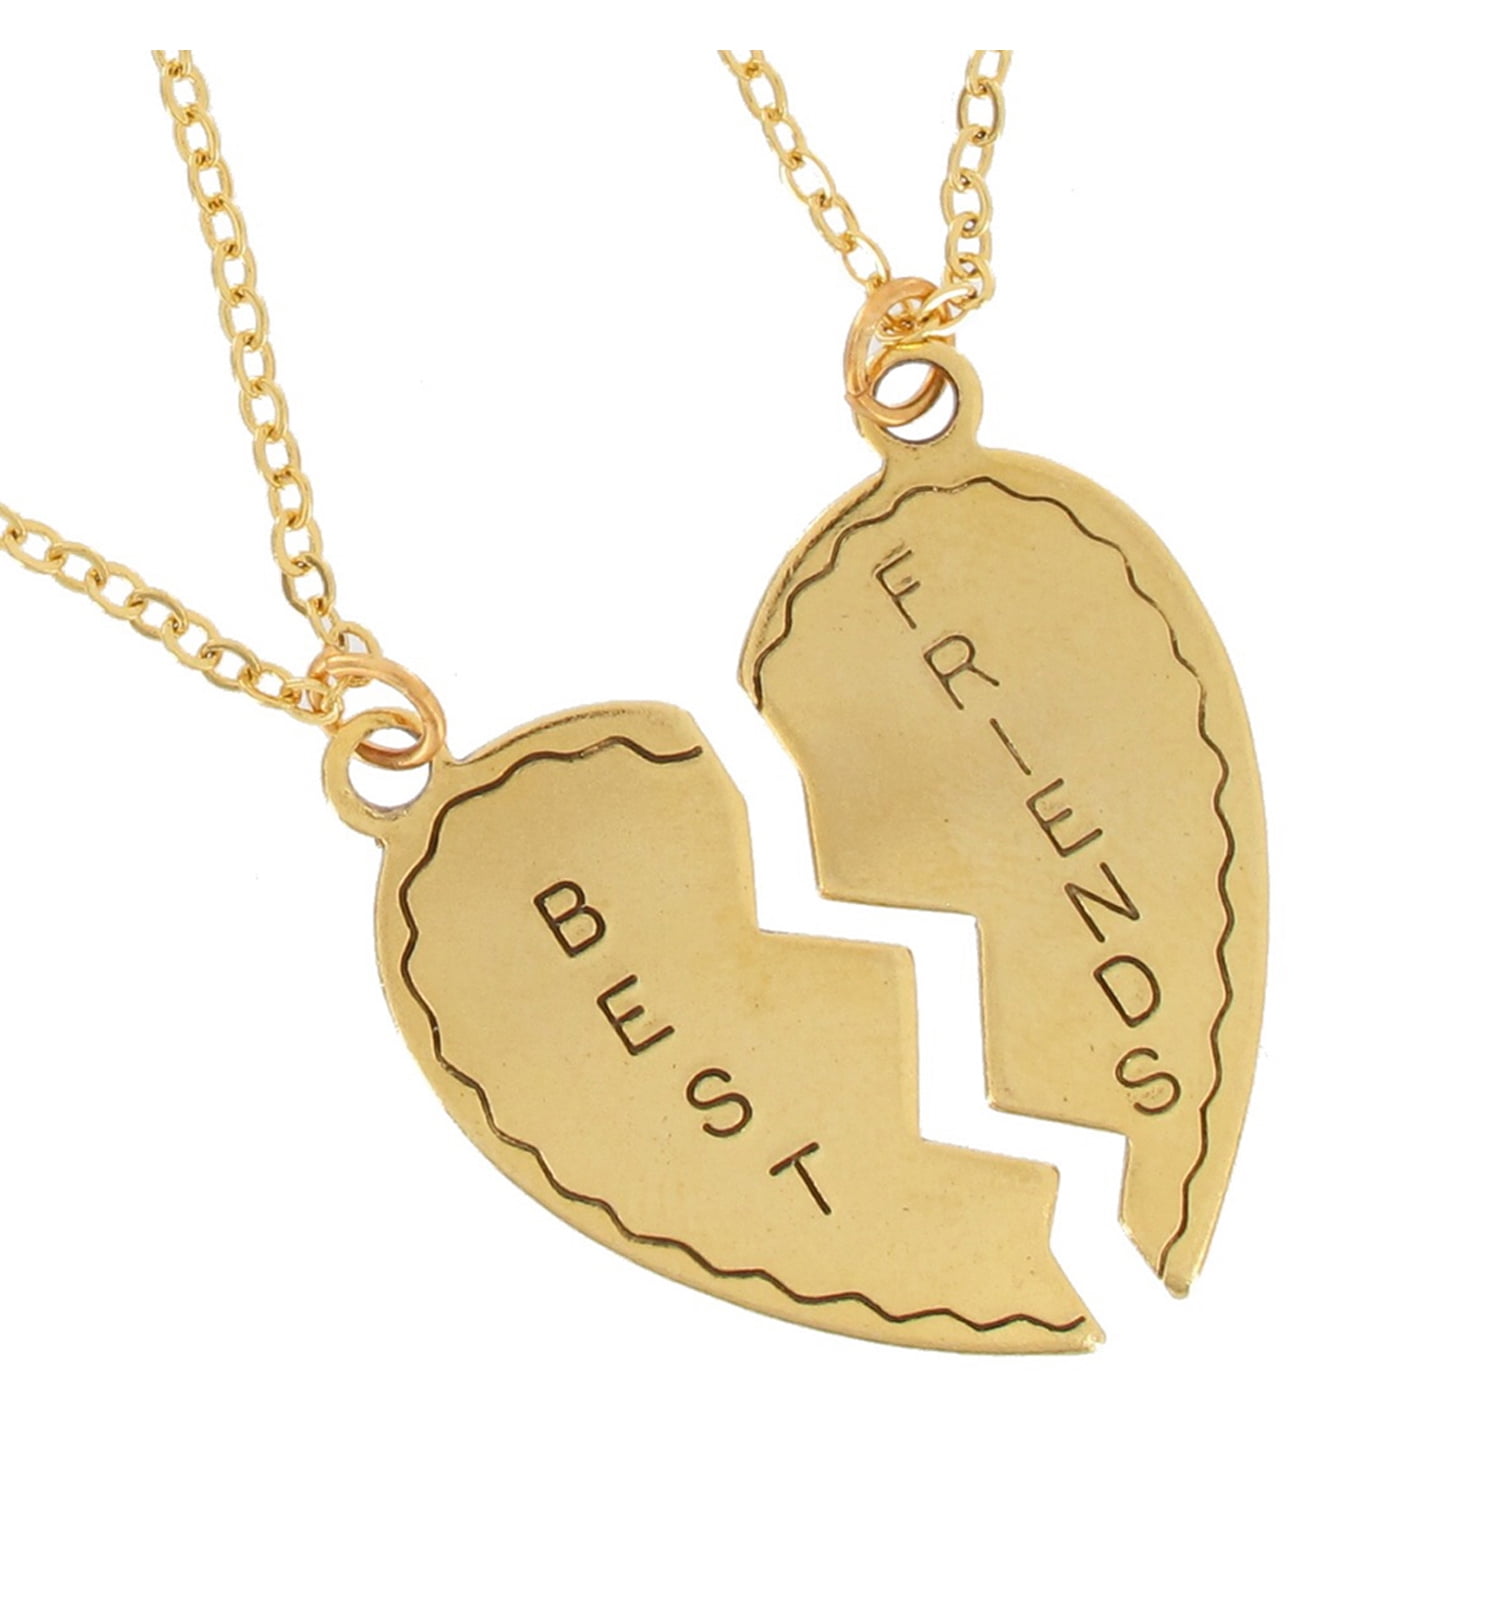 Ky And Co Best Friends Broken Heart Pendant Necklaces Bff Gold Tone Set 